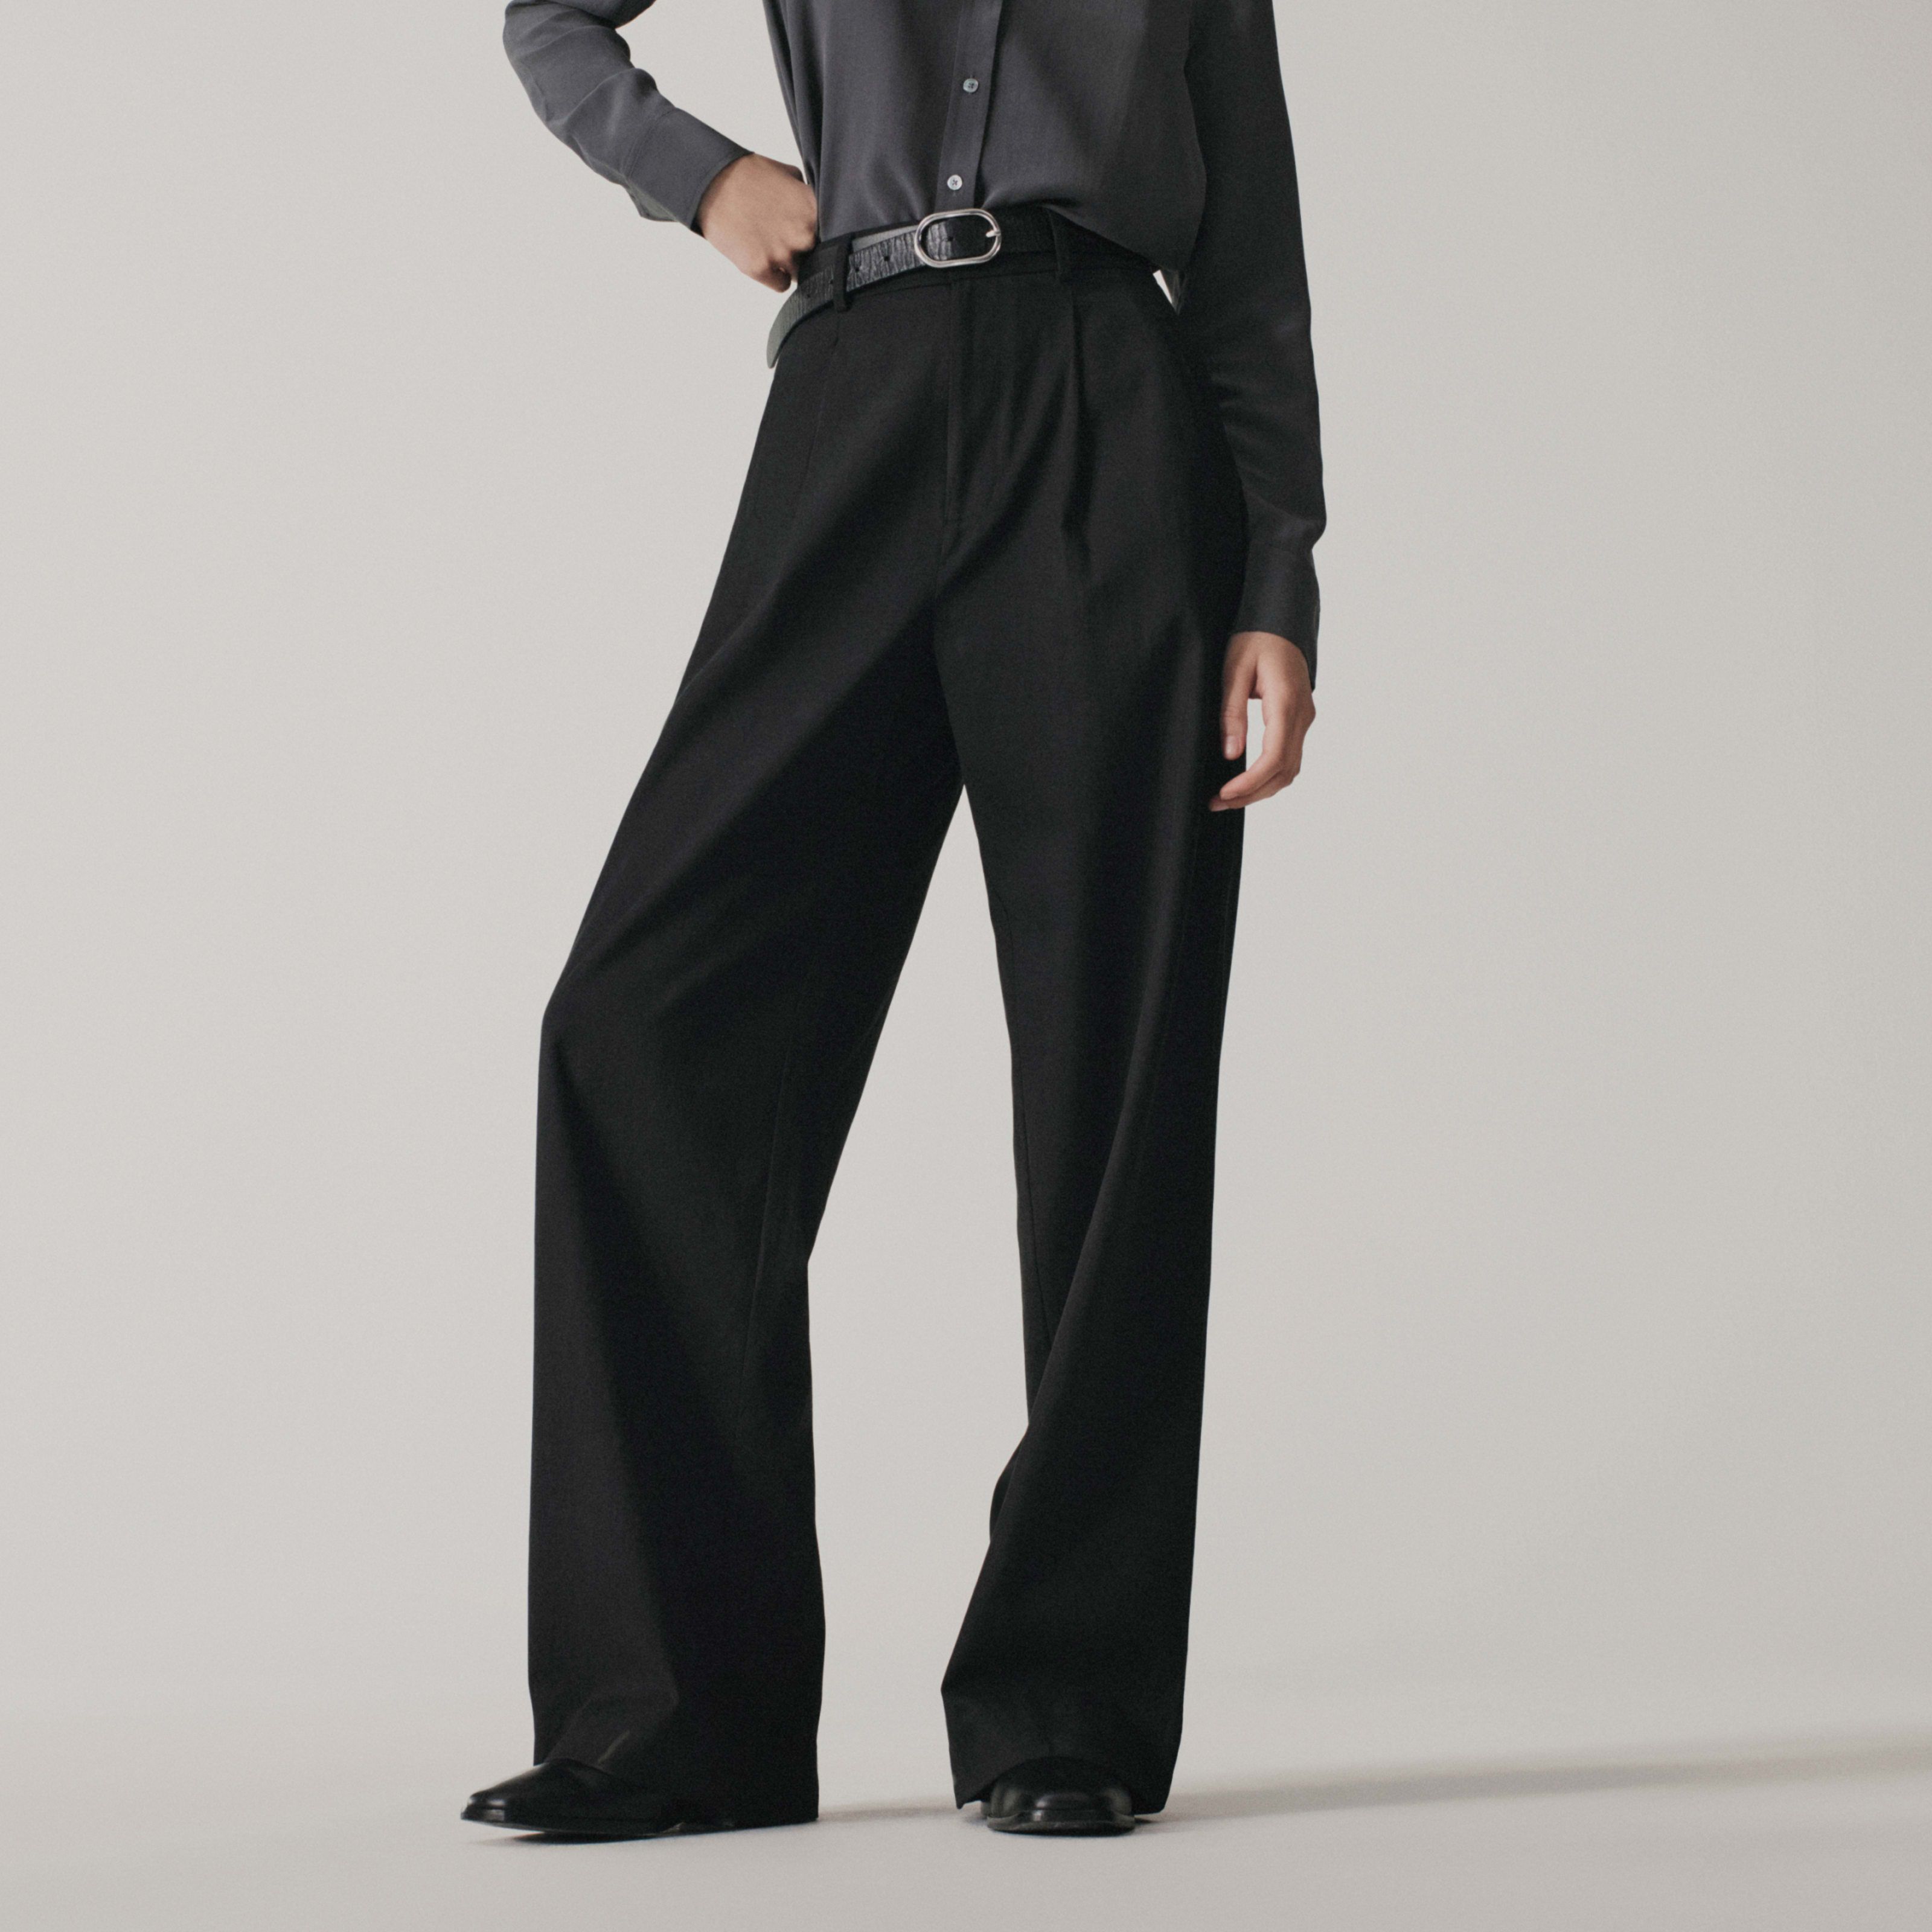 Women's Way-High Drape Pant by Everlane in Black, Size 2 | Everlane